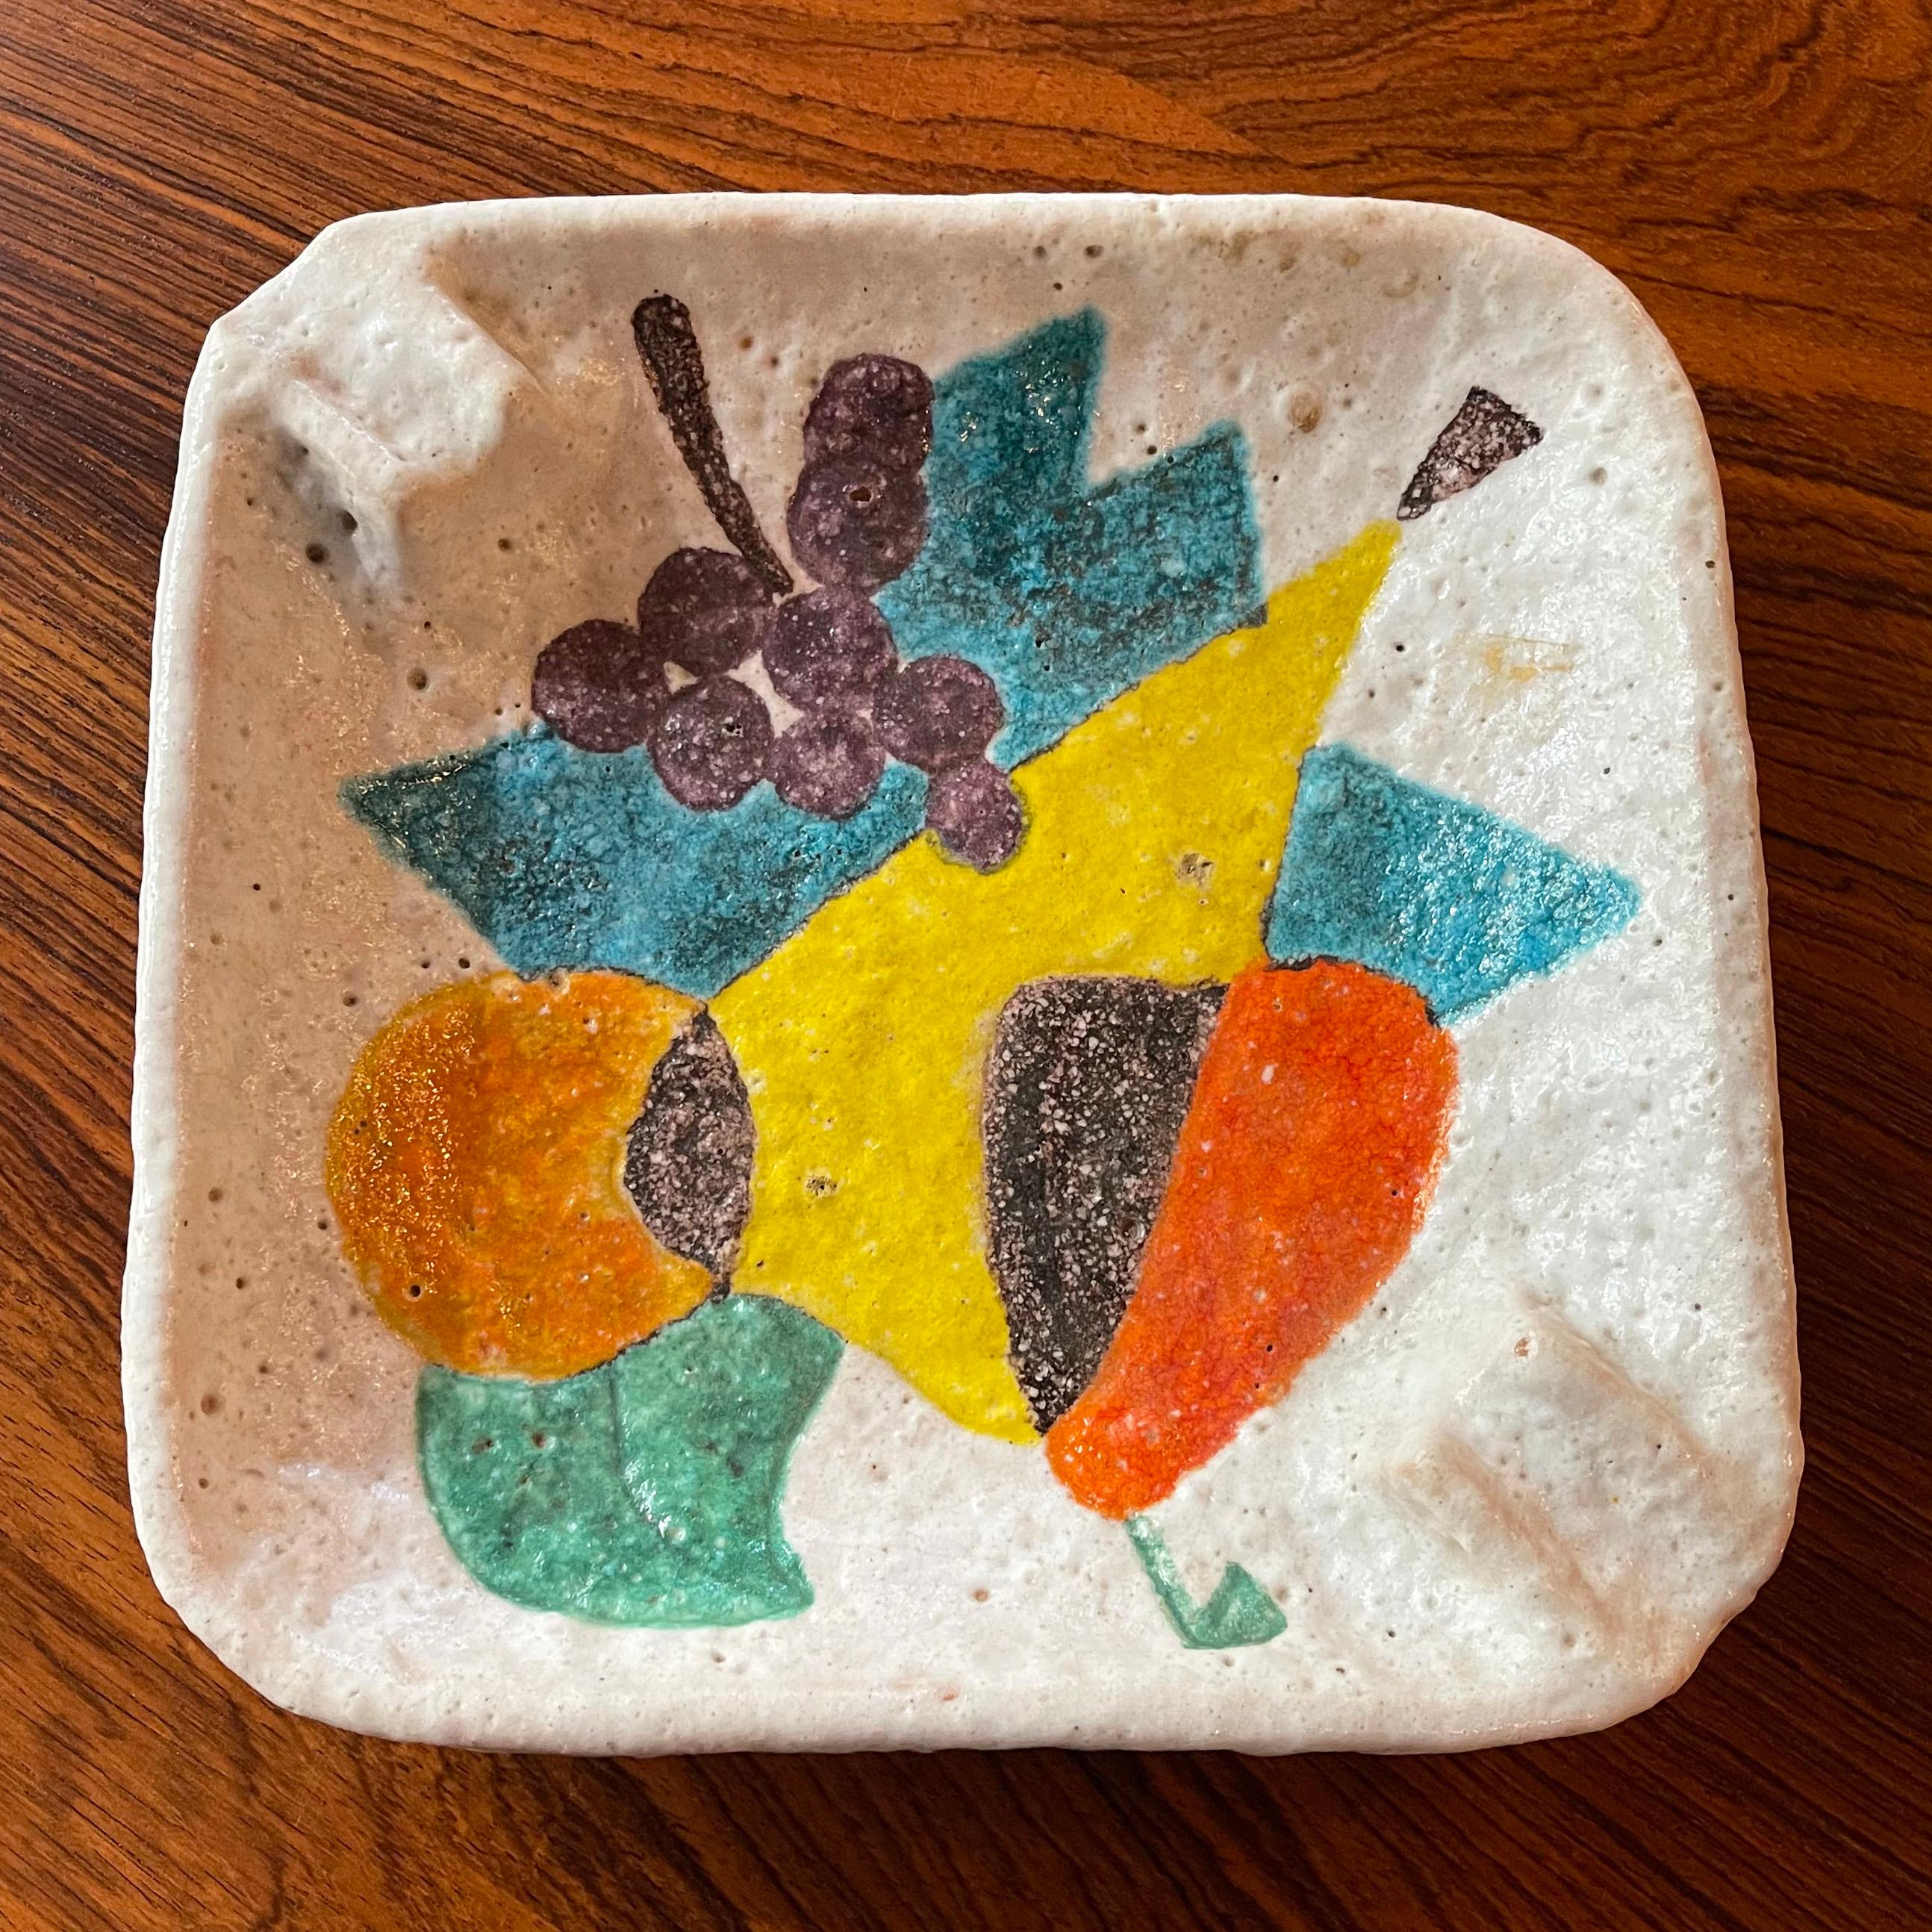 Large, Italian, midcentury modern, art pottery ashtray by Raymor features a painted, multicolor, abstract fruit arrangement. The tray has a lava glaze technique which gives the surface a smooth yet irregular texture. The tray feels weighty with the